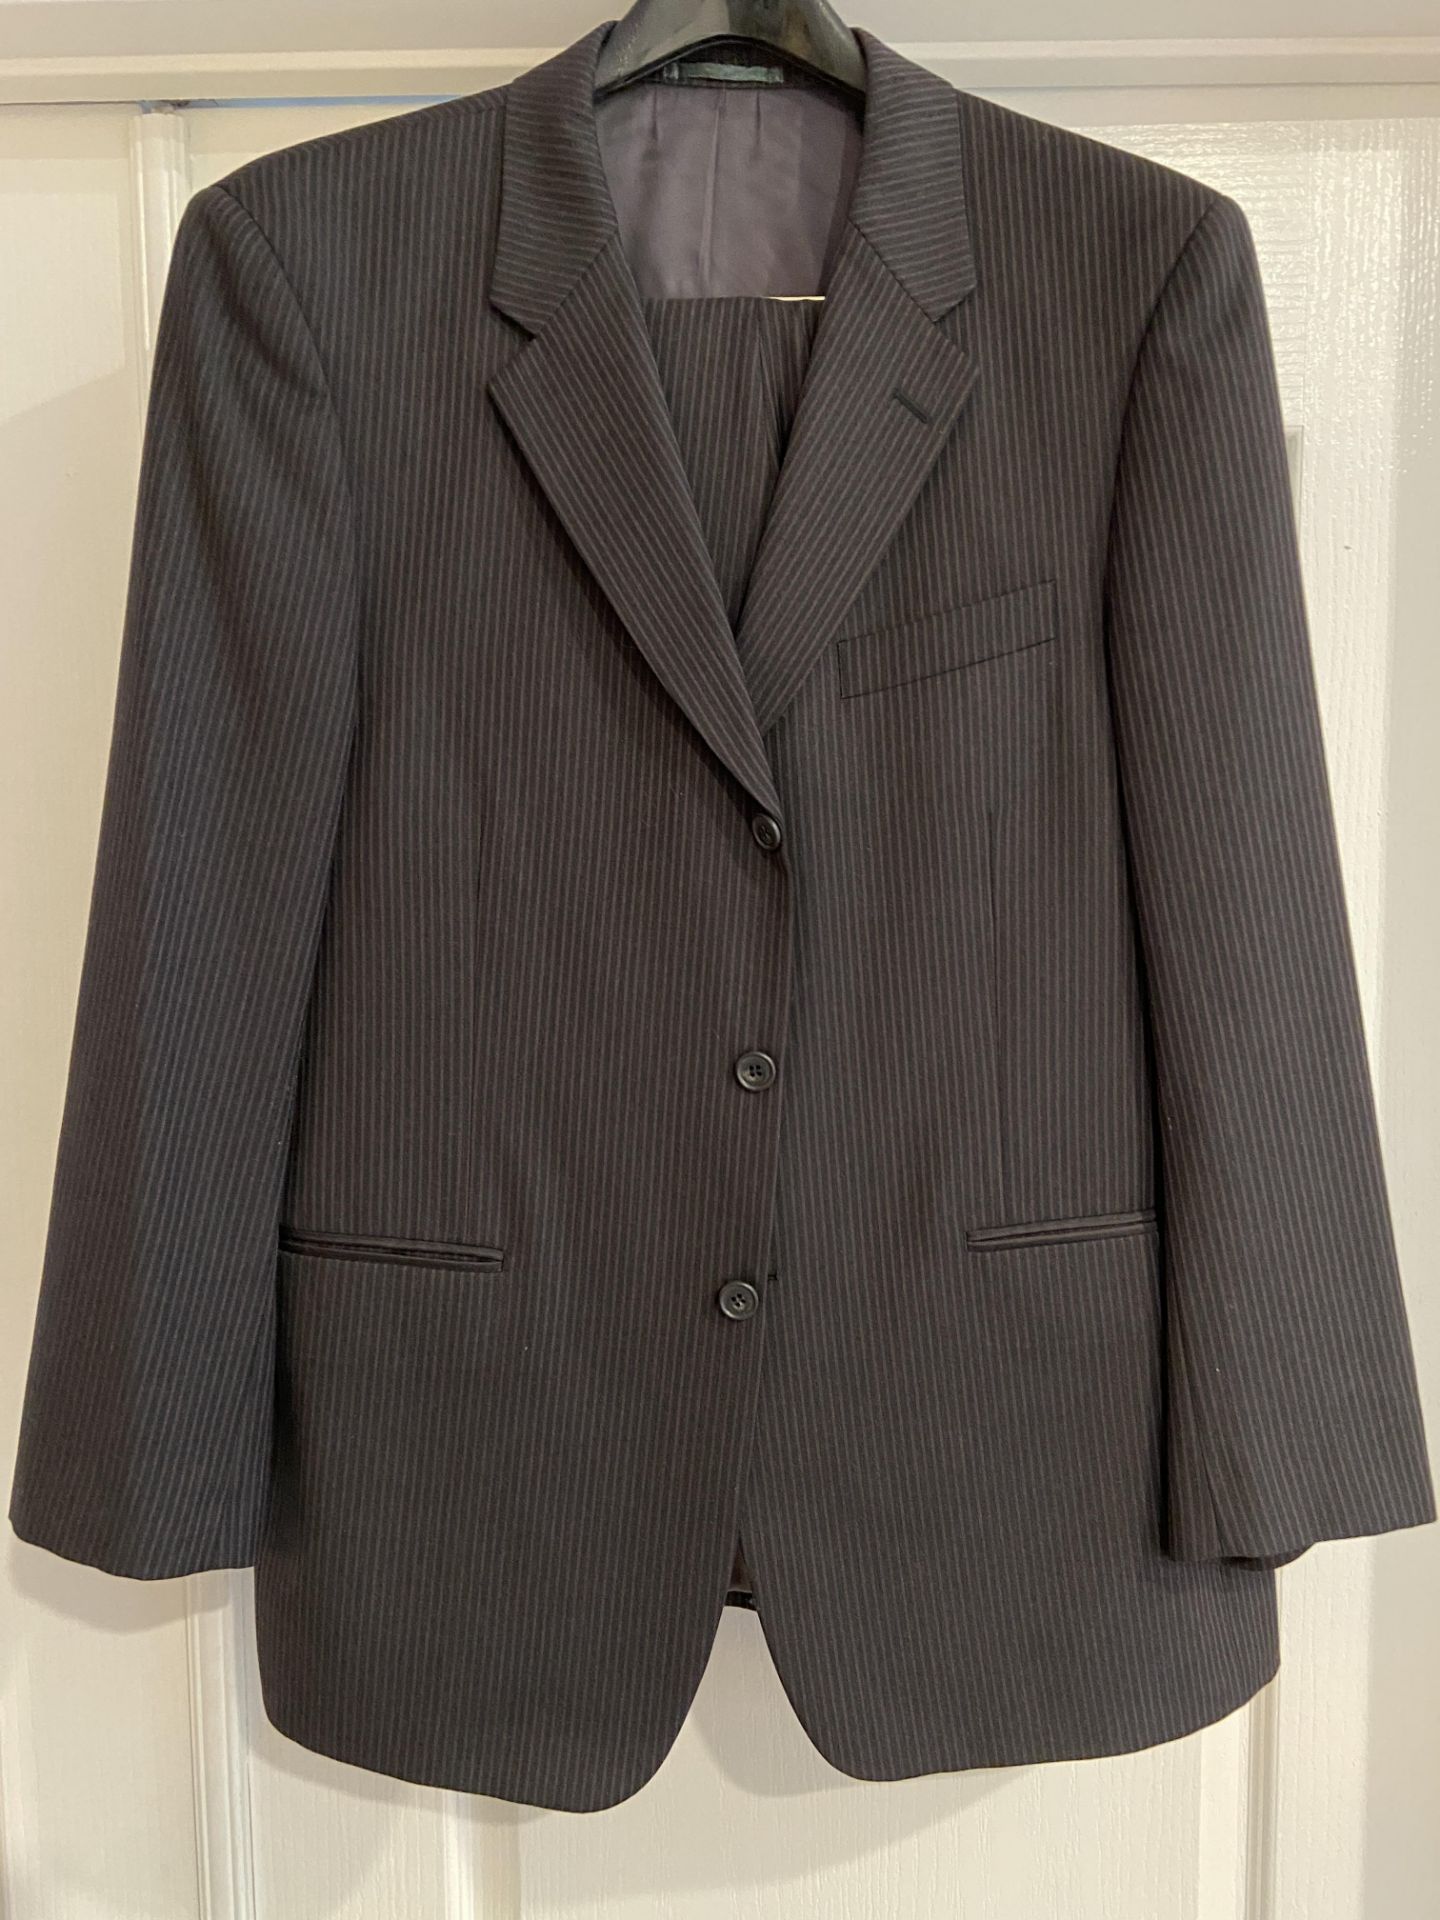 Collection of High End Men's Clothing: 6 Suits Size 42R, 1 Sport Jacket Size 42R, 1 Polo XL - Image 4 of 18